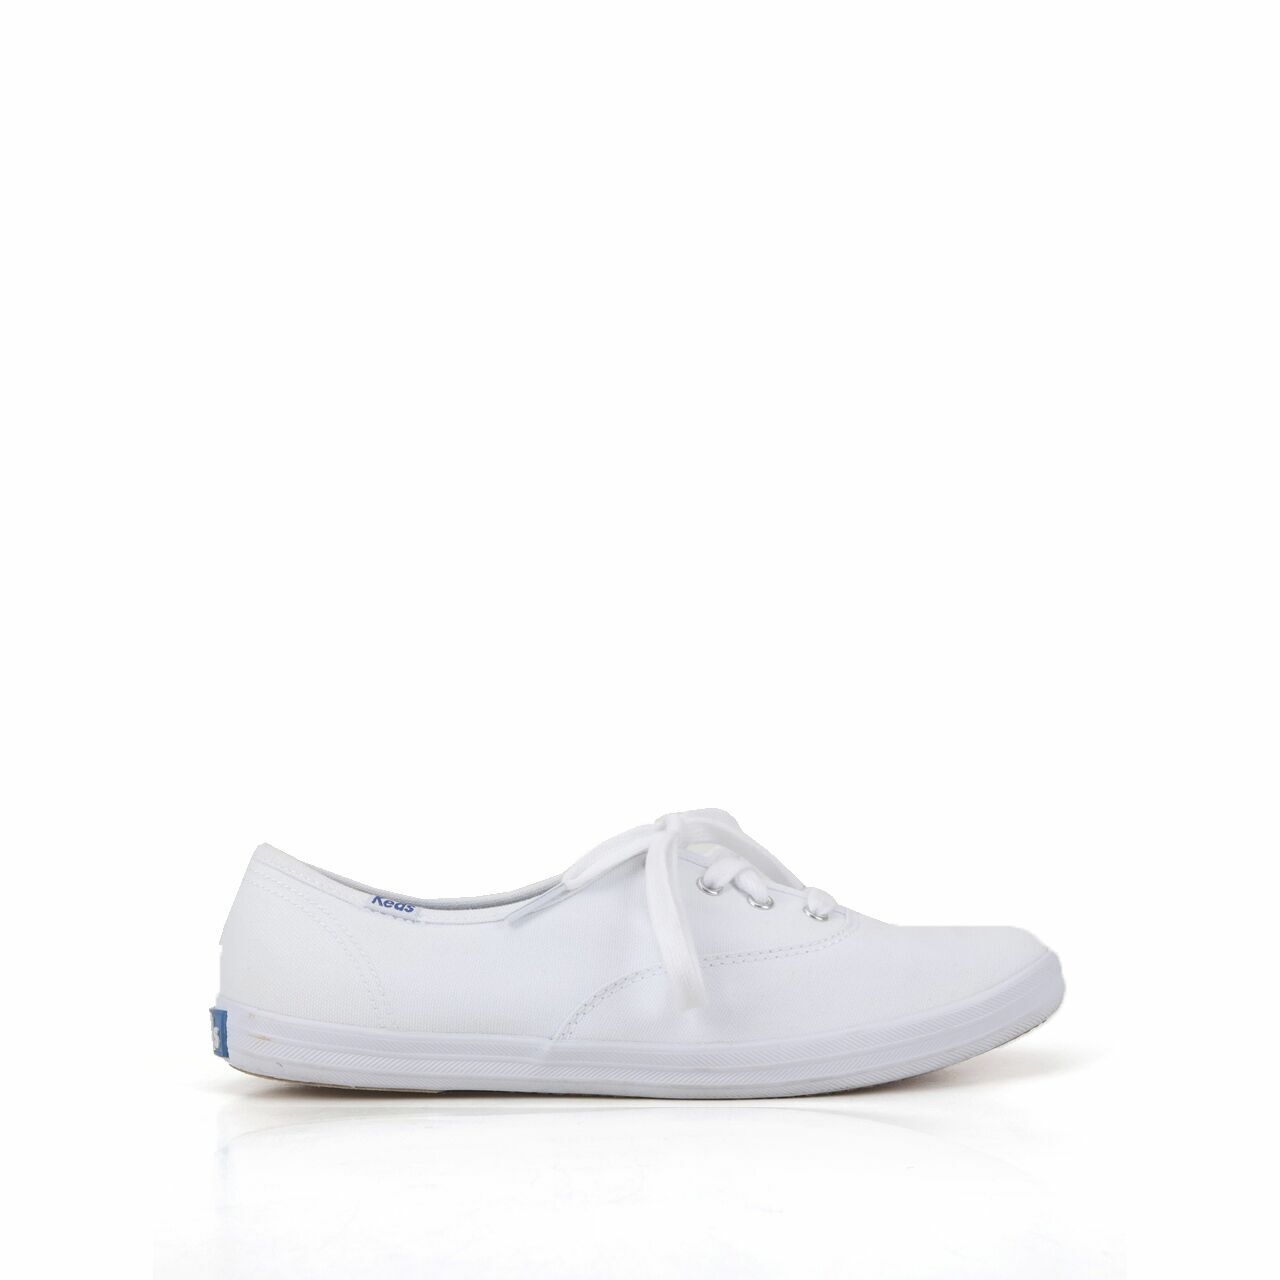 Keds White Sneakers